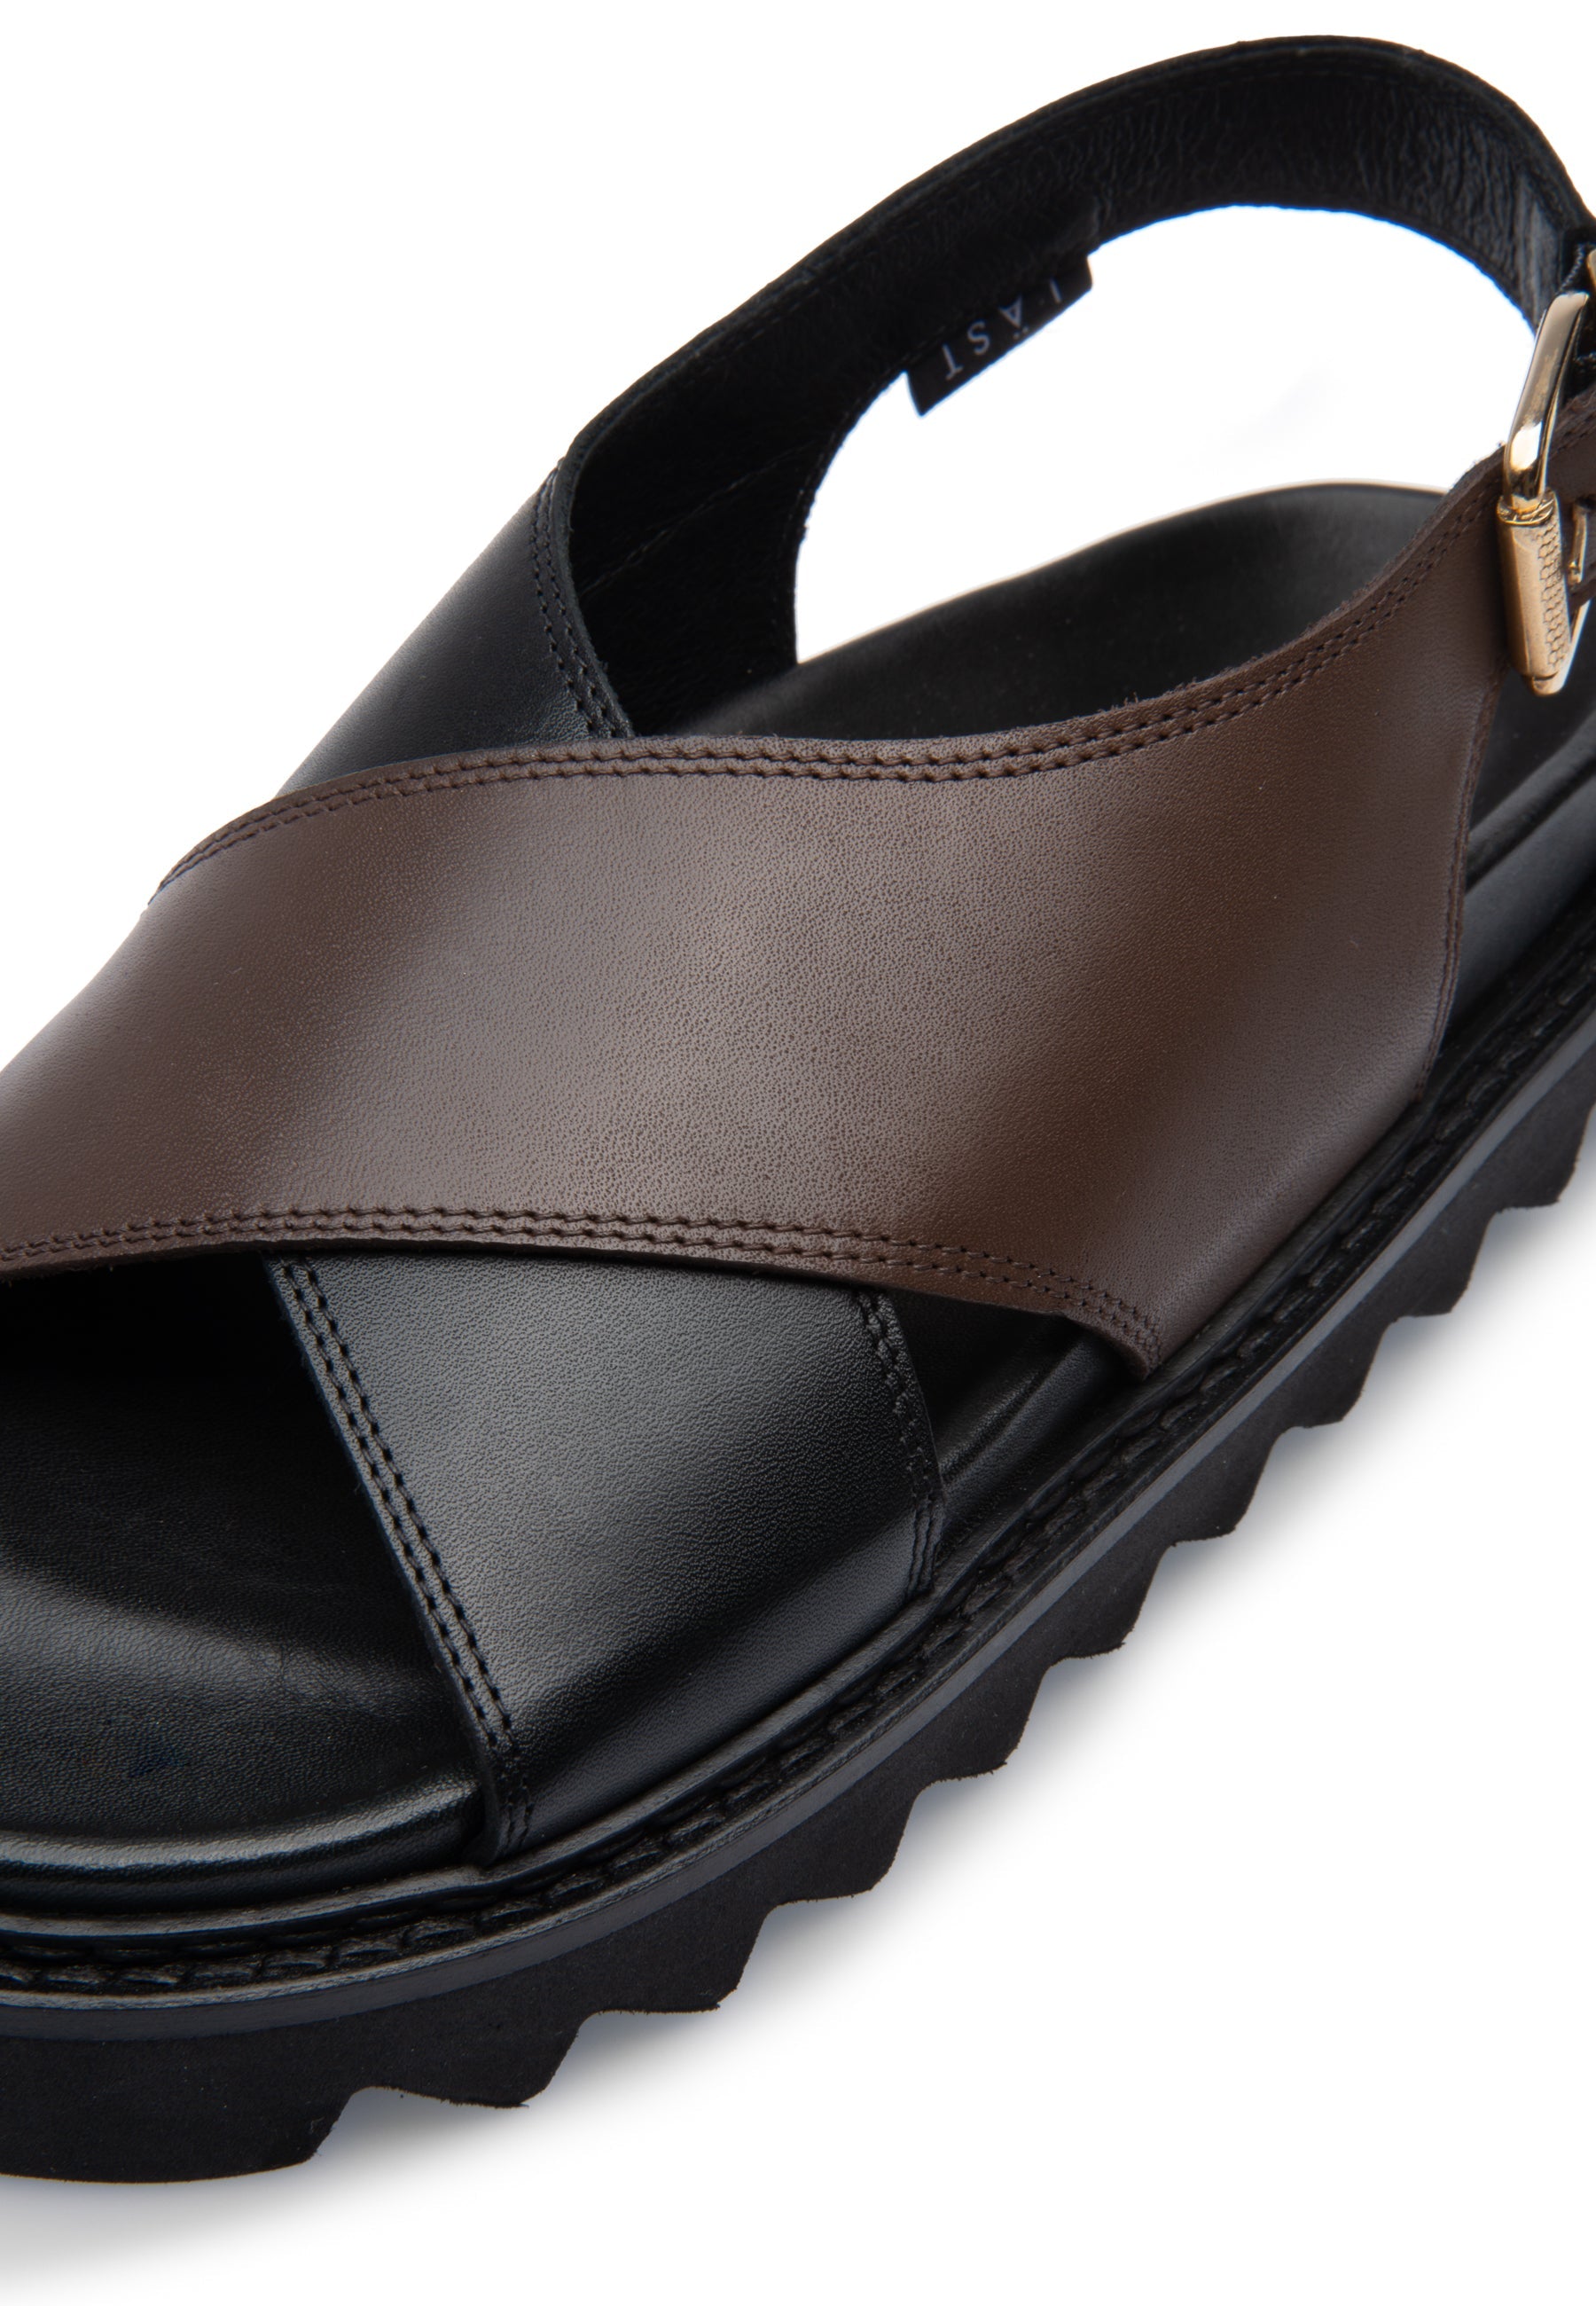 Diana Black Brown Leather Chunky Sandals LAST1521 - 6